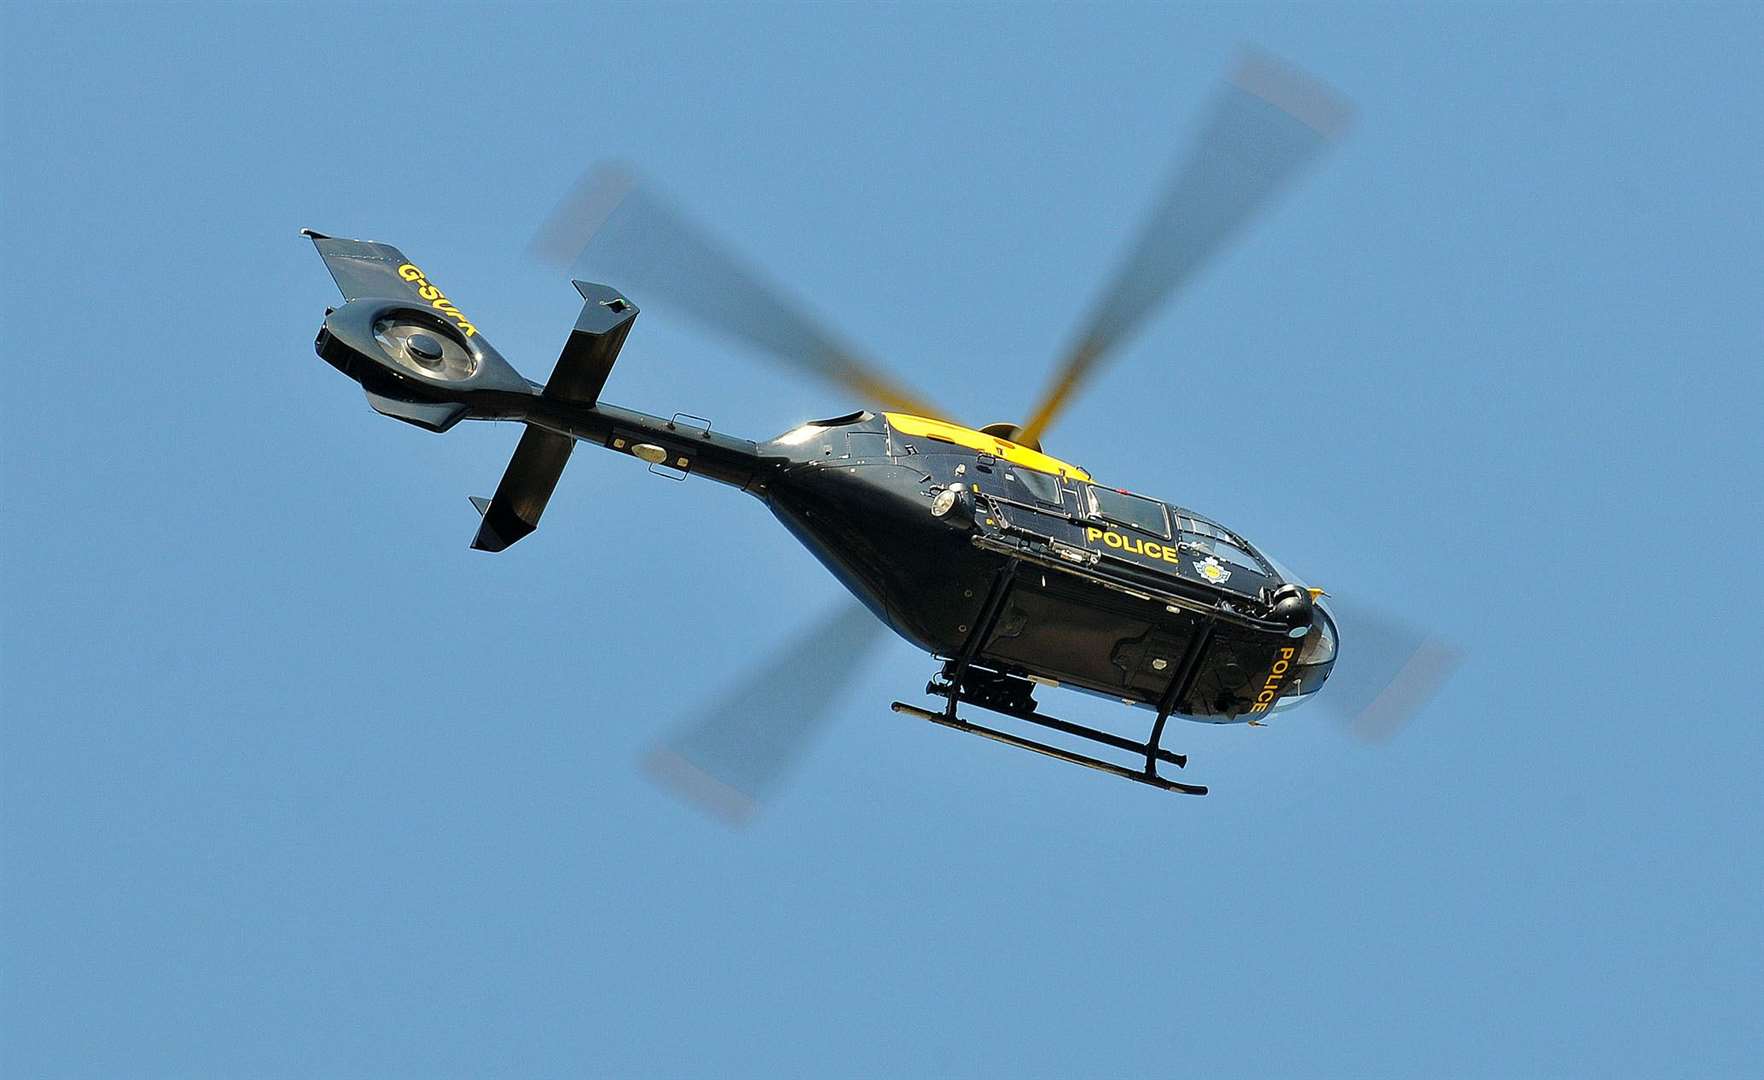 The police helicopter was called in to help search for the groups